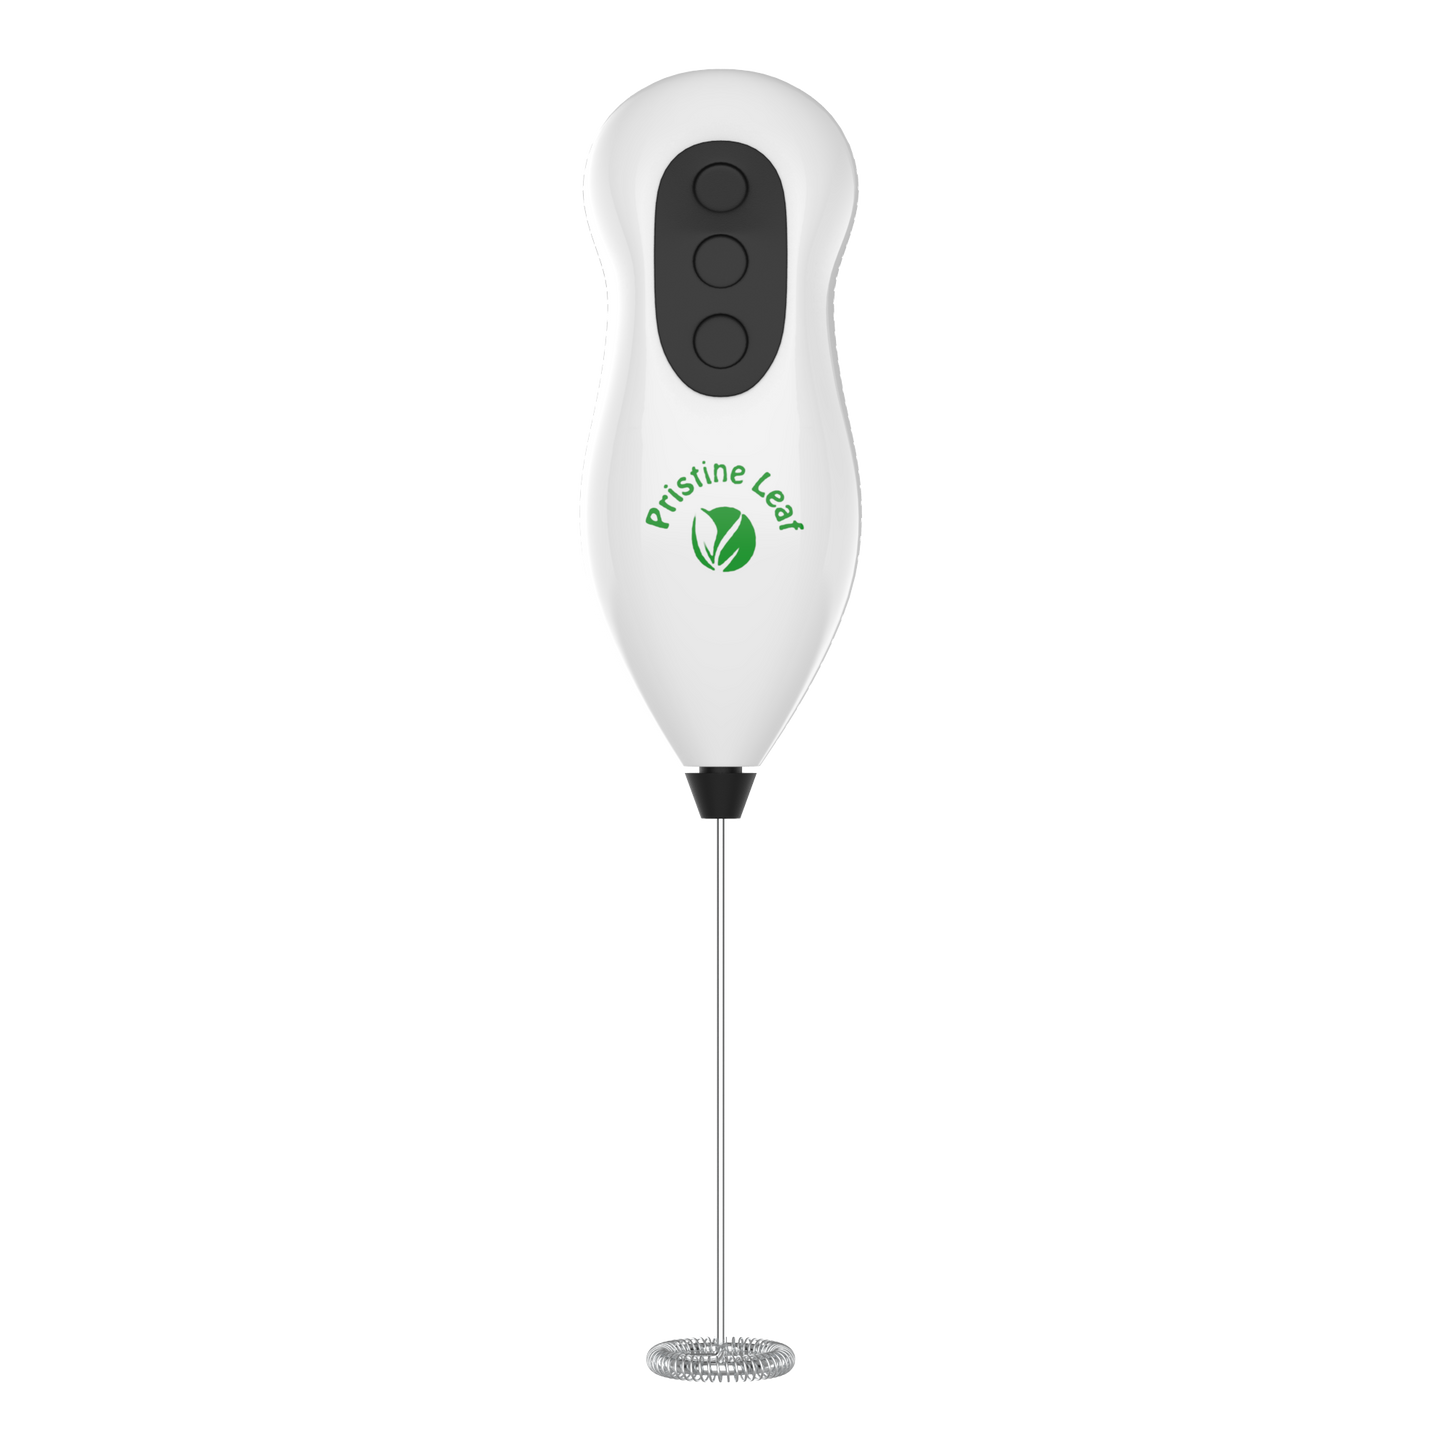 Milk Frother Handheld Battery Operated Electric Matcha Whisk, Milk